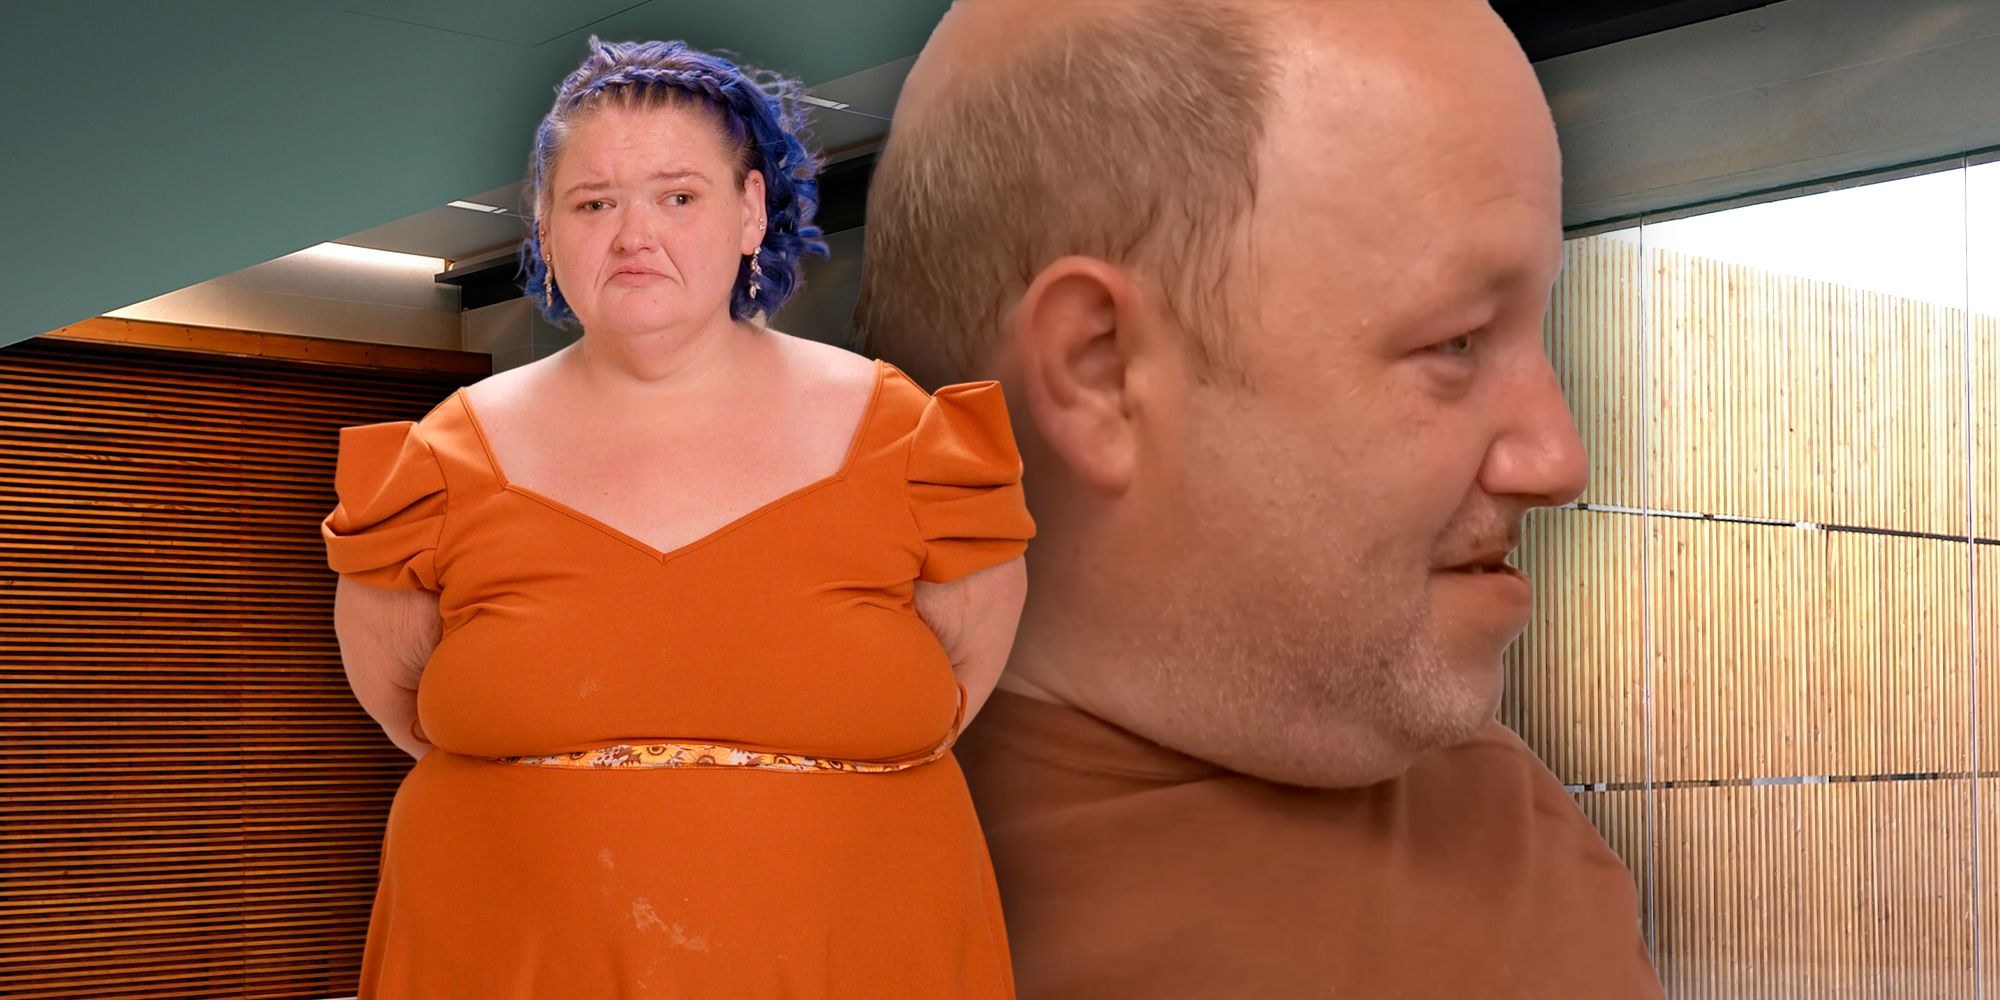 1000-Lb Sisters' Amy Slaton and Michael Halterman looking sad and serious, respectively